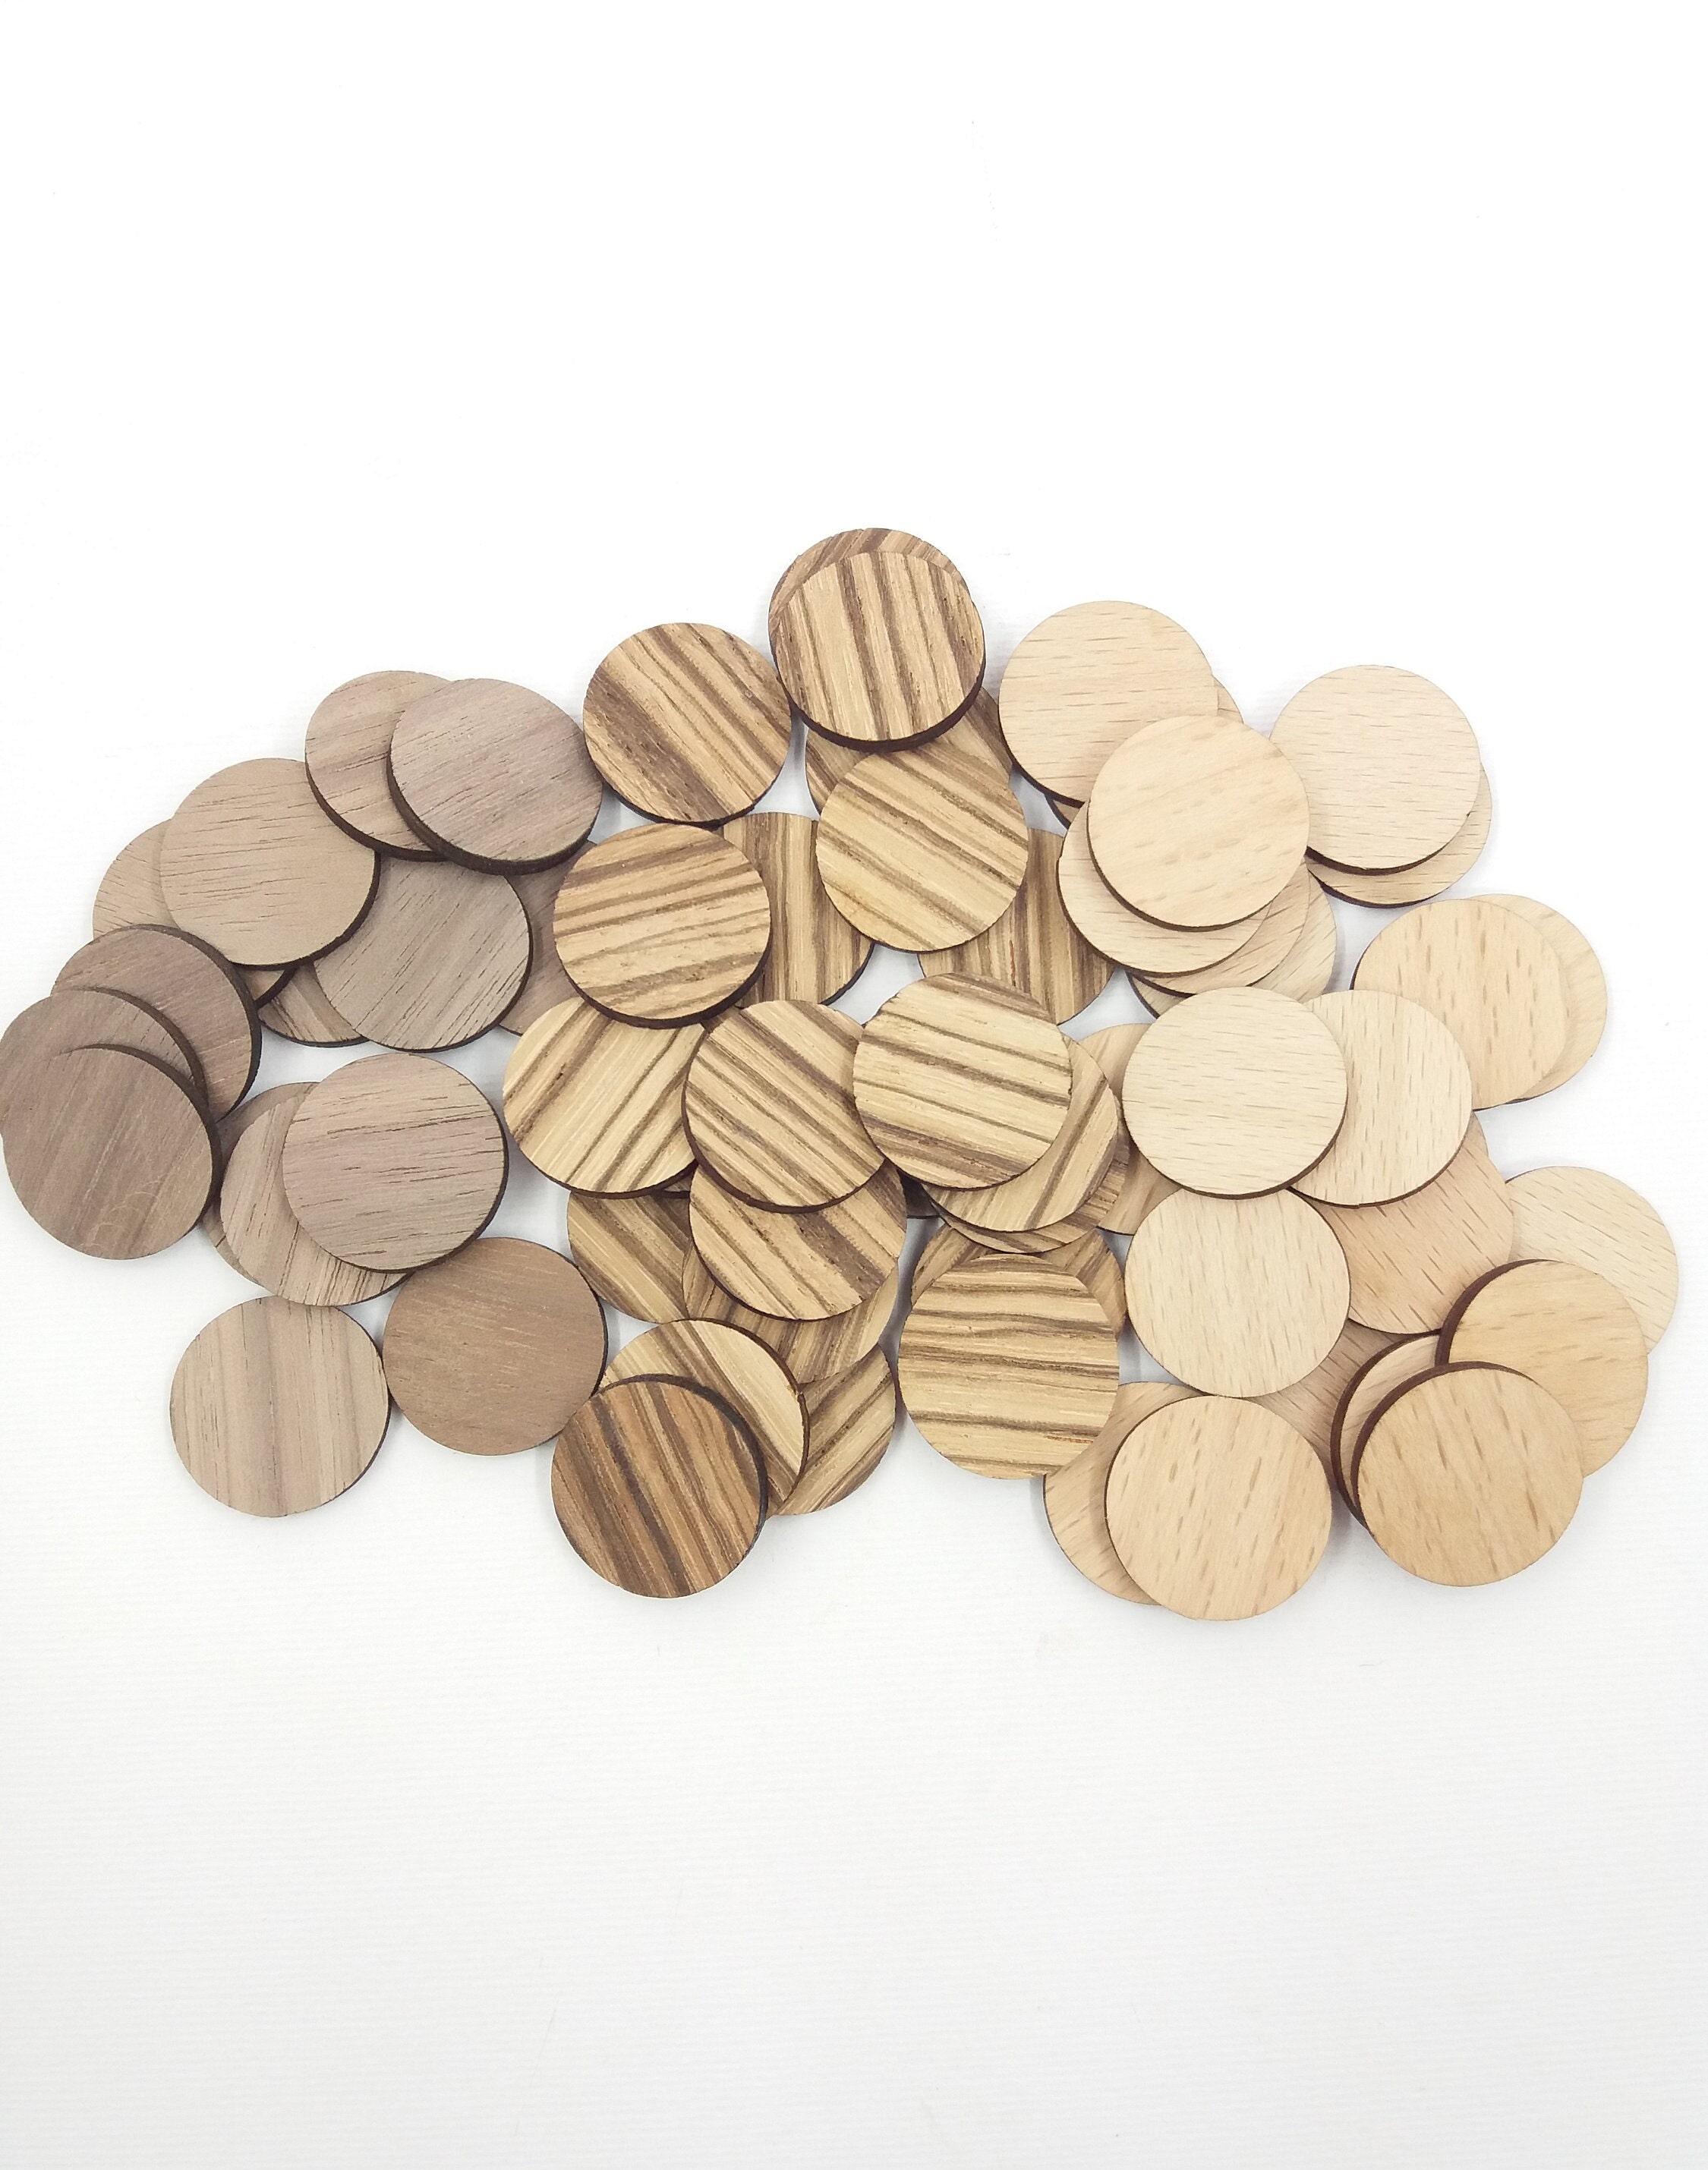 20 Pcs 12 inch Unfinished Wood Circles, Thickness 2.6 mm, Wooden Rounds for Crafts, Wood Discs for DIY Painting Decorations, Weddings and Parties,by